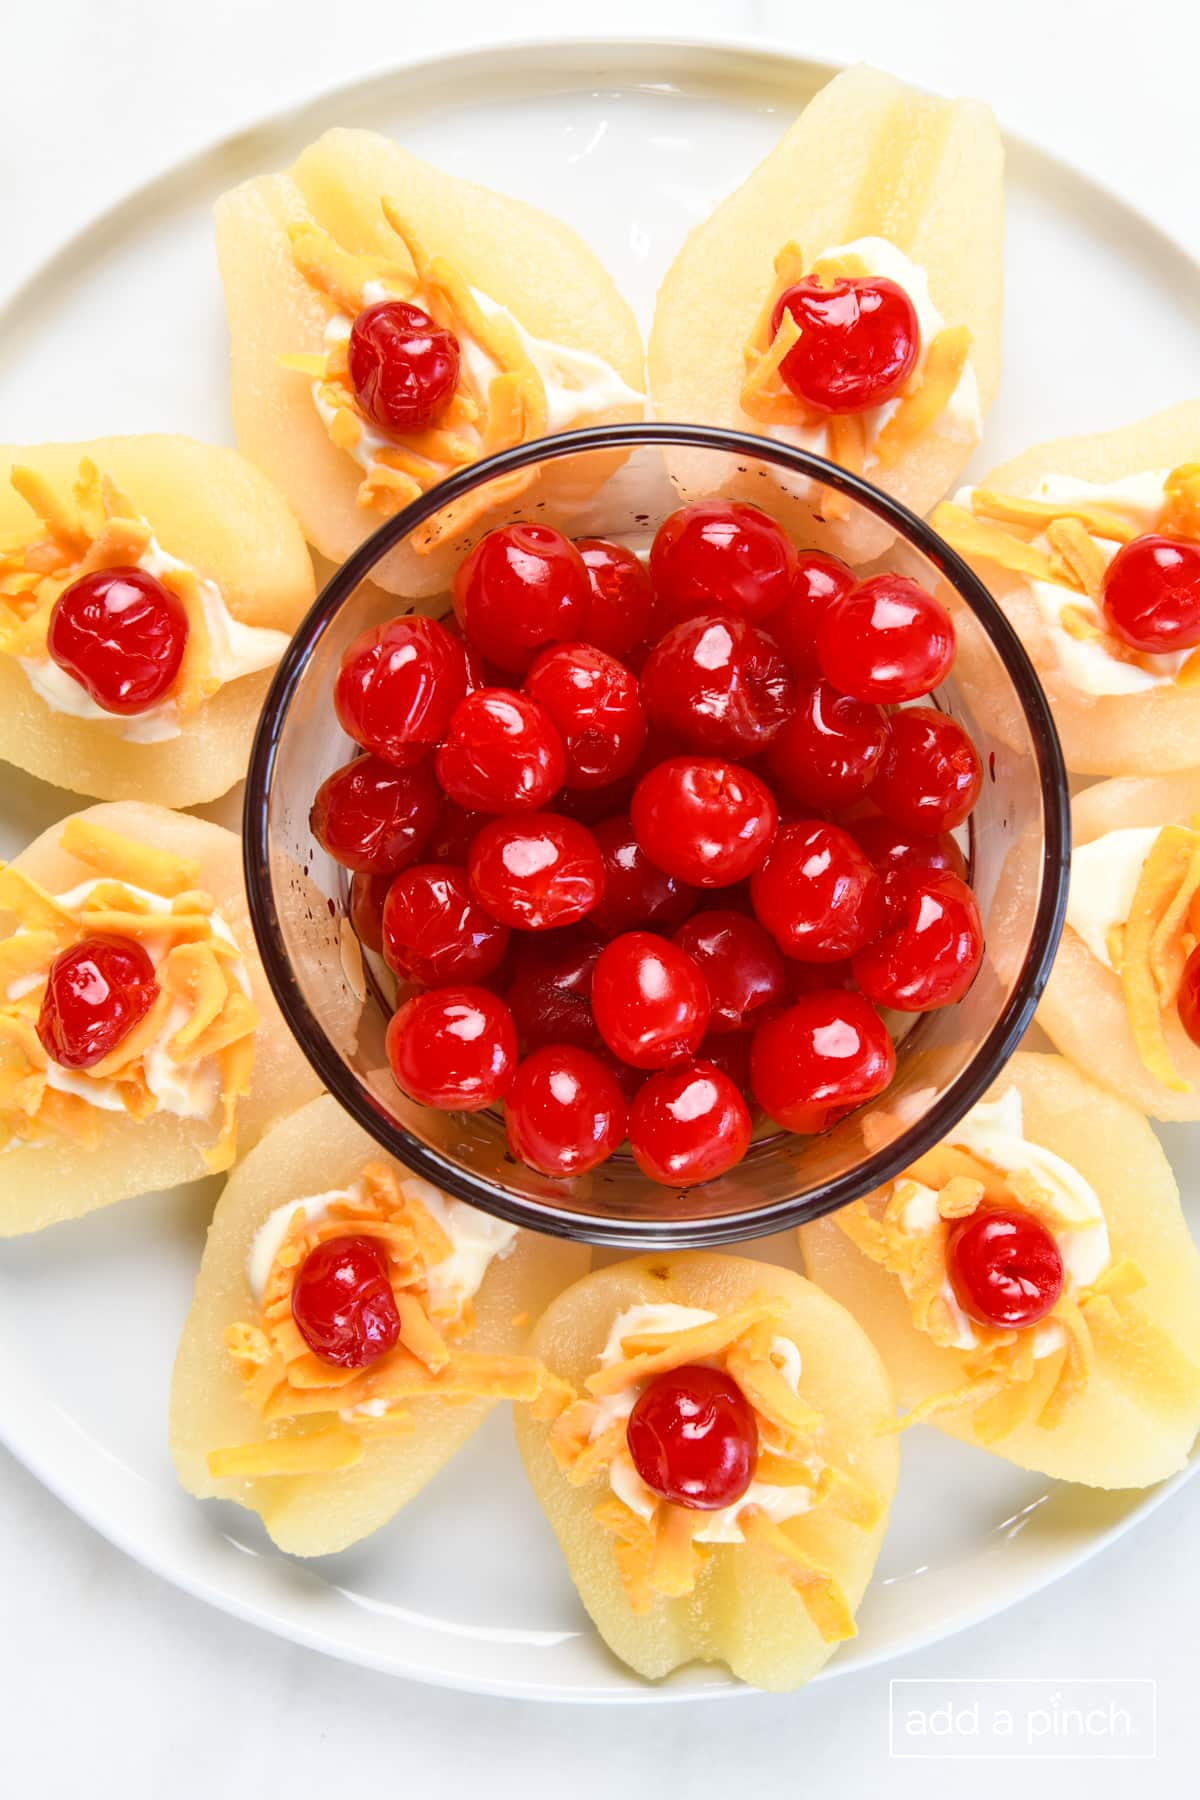 Photo of pears topped with cheese and cherries and a bowl of cherries on a white platter.